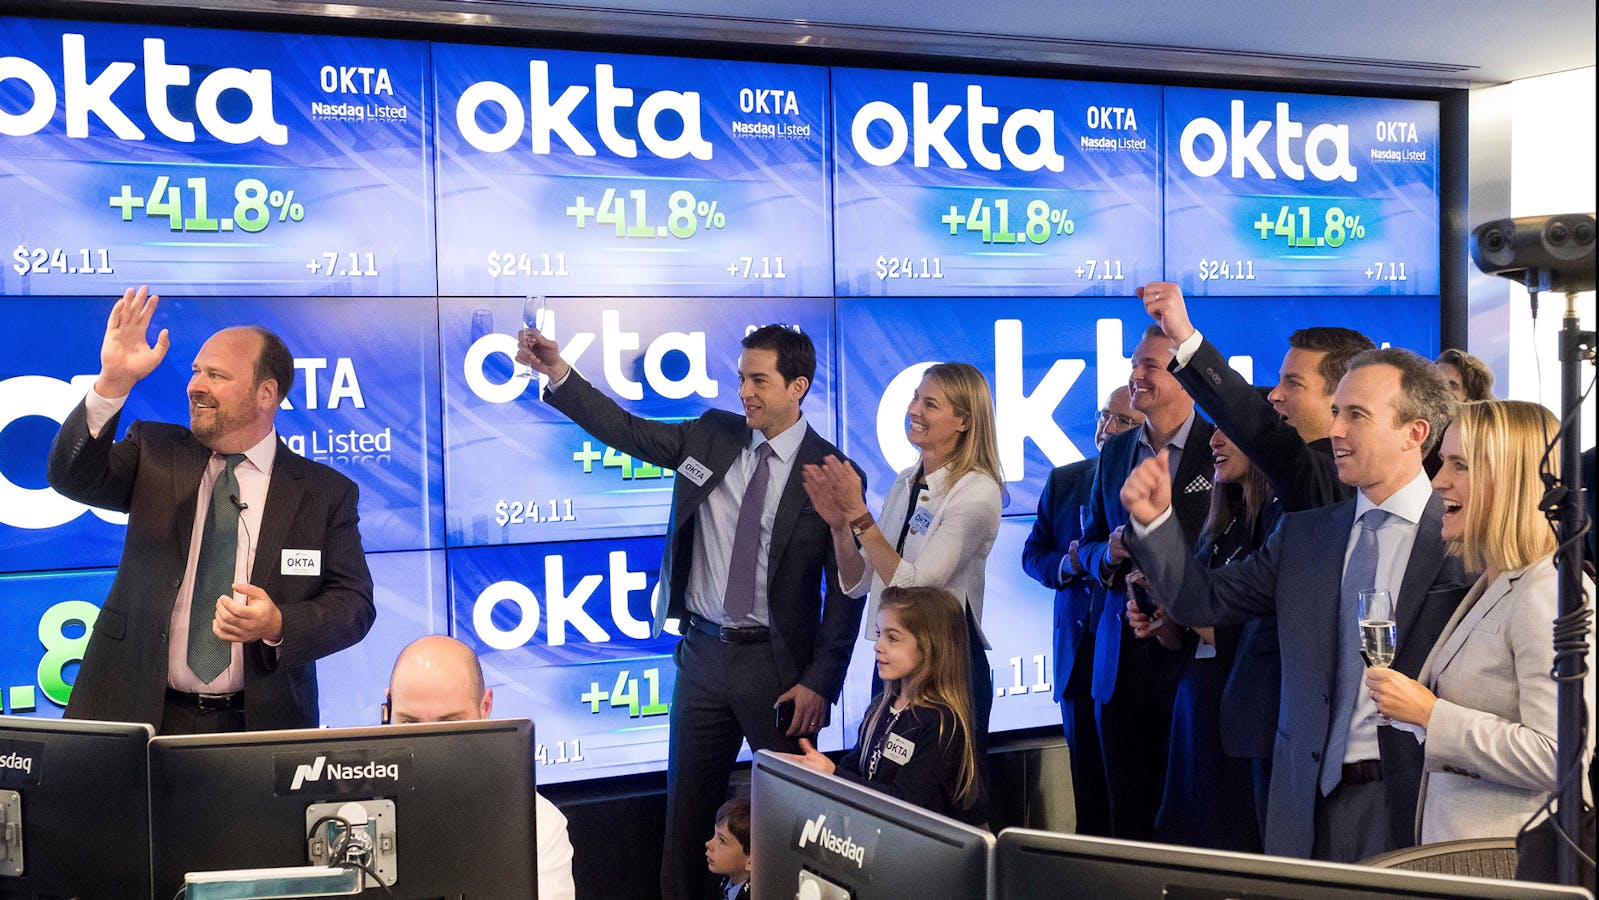 A scene from the 2017 day when Okta went public. Photo by AP.